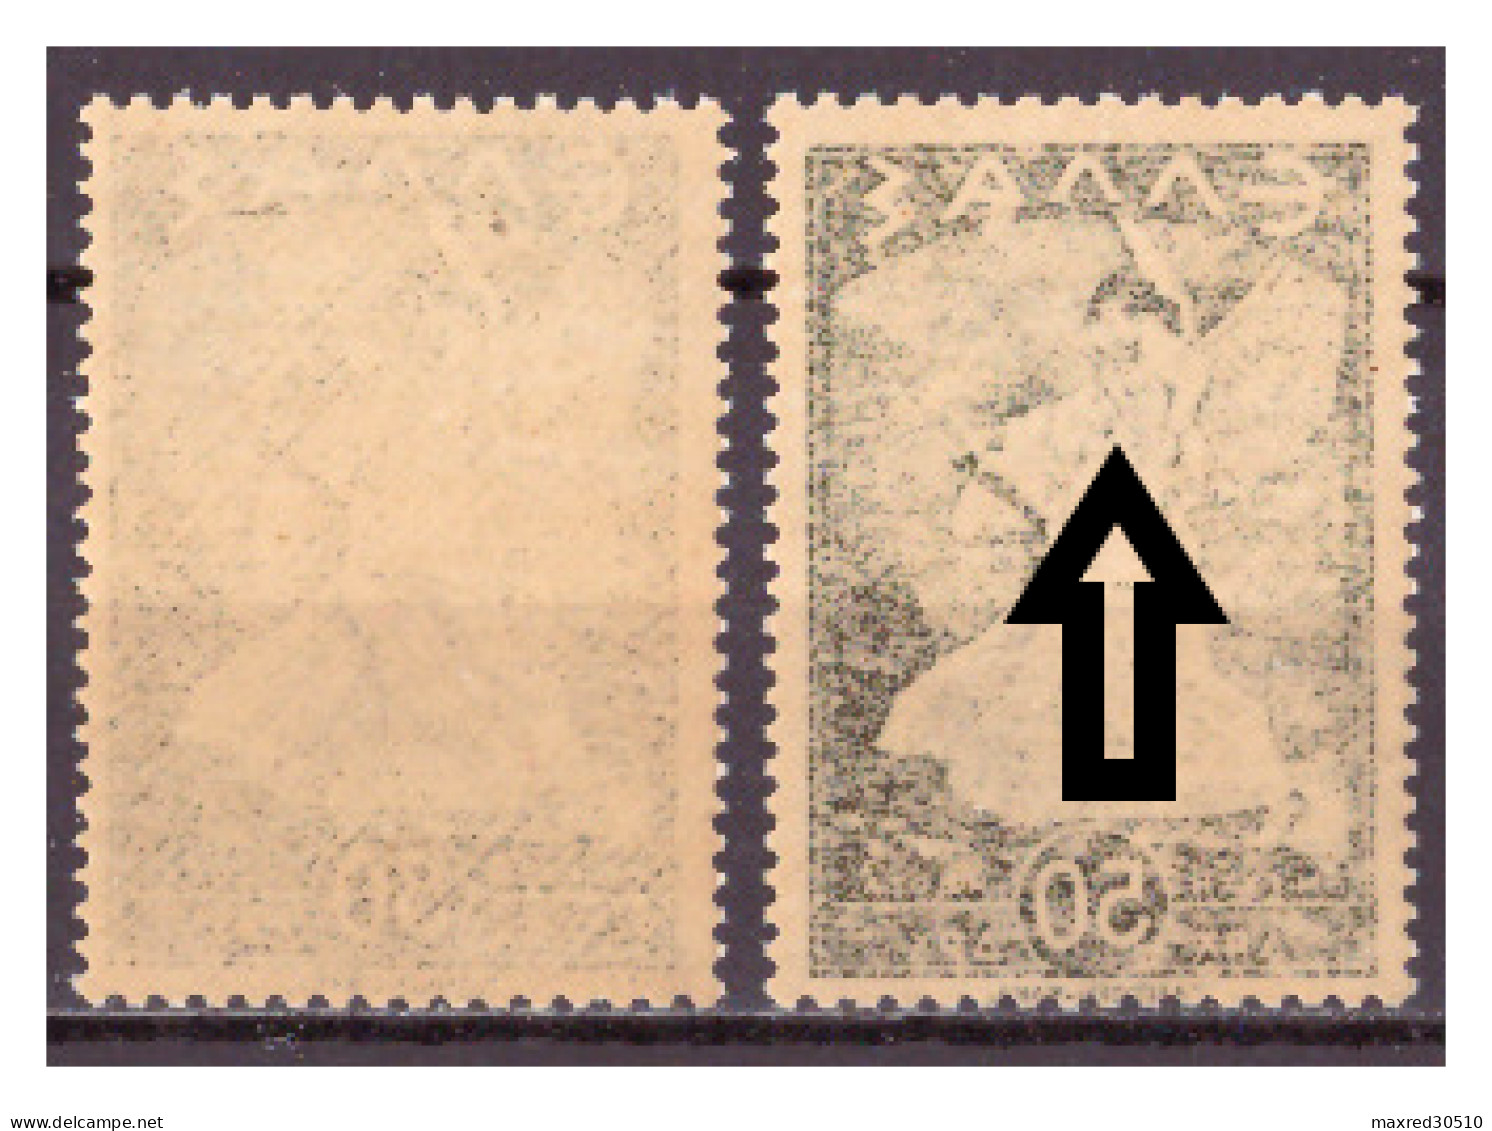 GREECE 1945 2X50L. OF THE "GLORY ISSUE" THE 2ND ONE (SEE ARROWS) WITH MIRROR PRINTING AT THE GUM ERROR MNH - Variedades Y Curiosidades